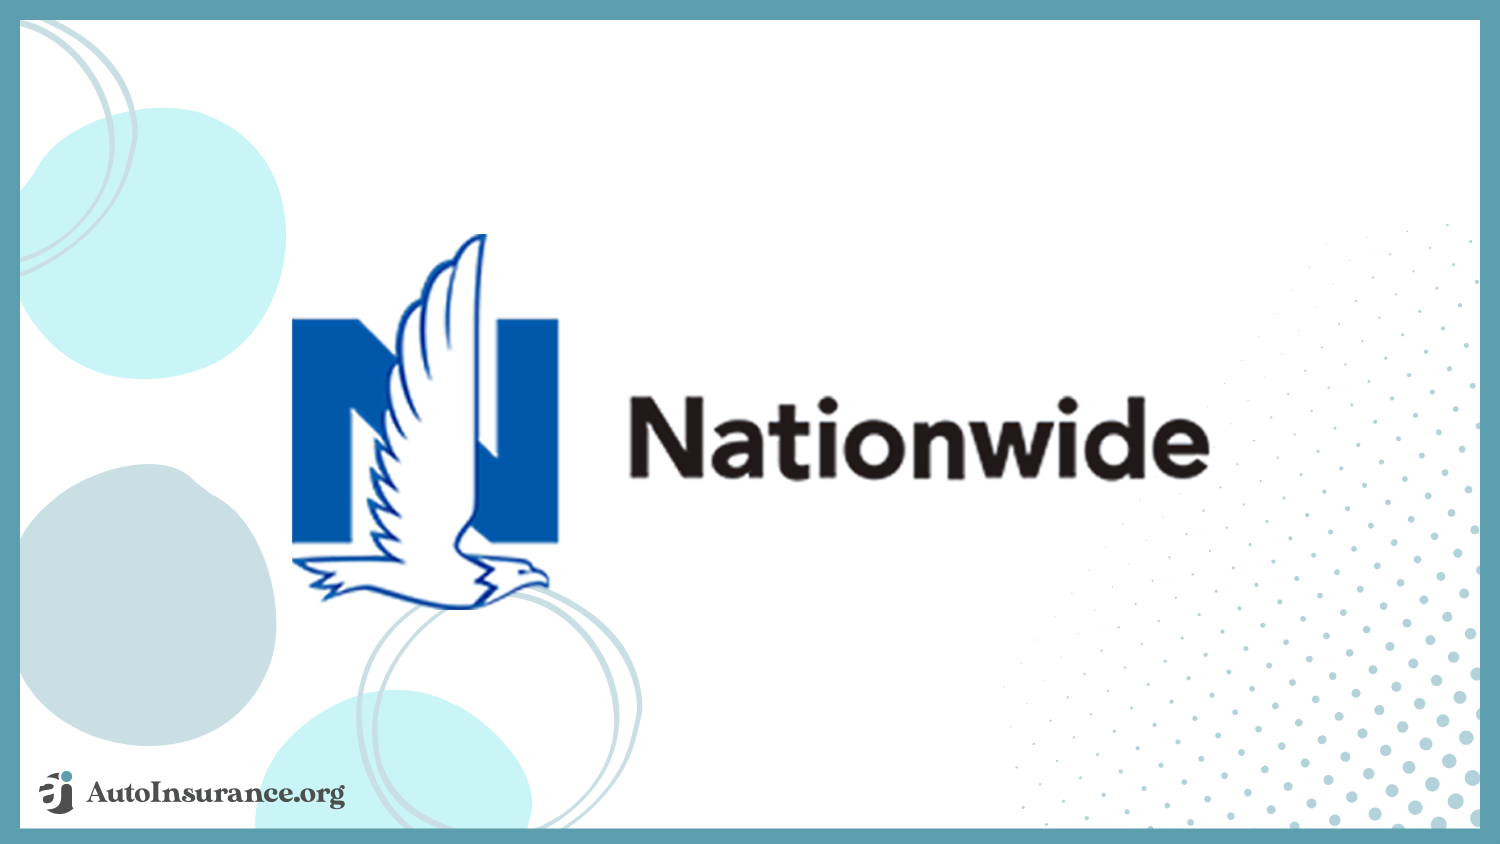 Nationwide: Best Parked Car Insurance